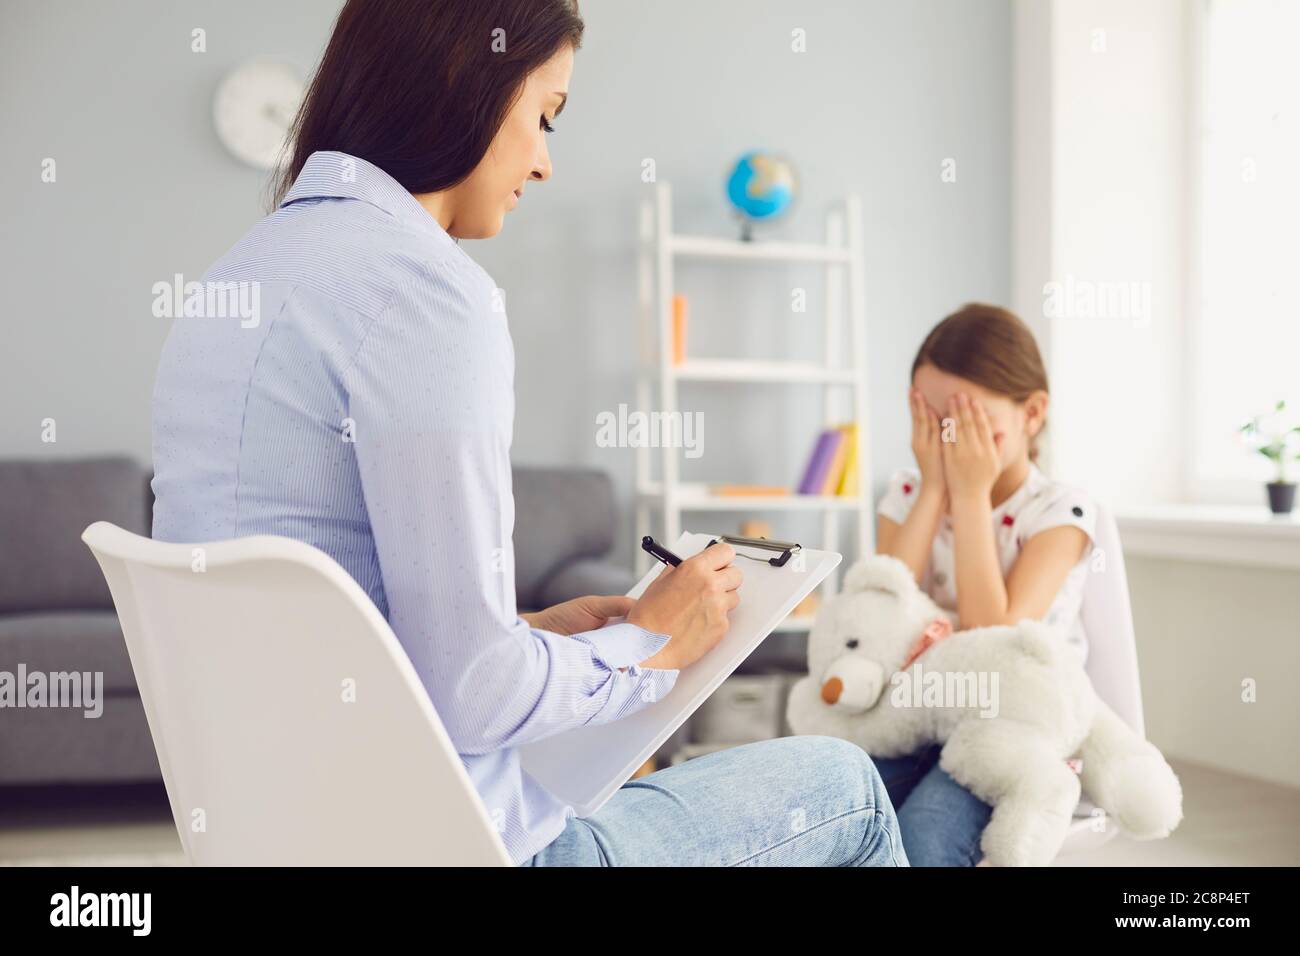 Young Psychologist is talking with a child in the room. Stock Photo